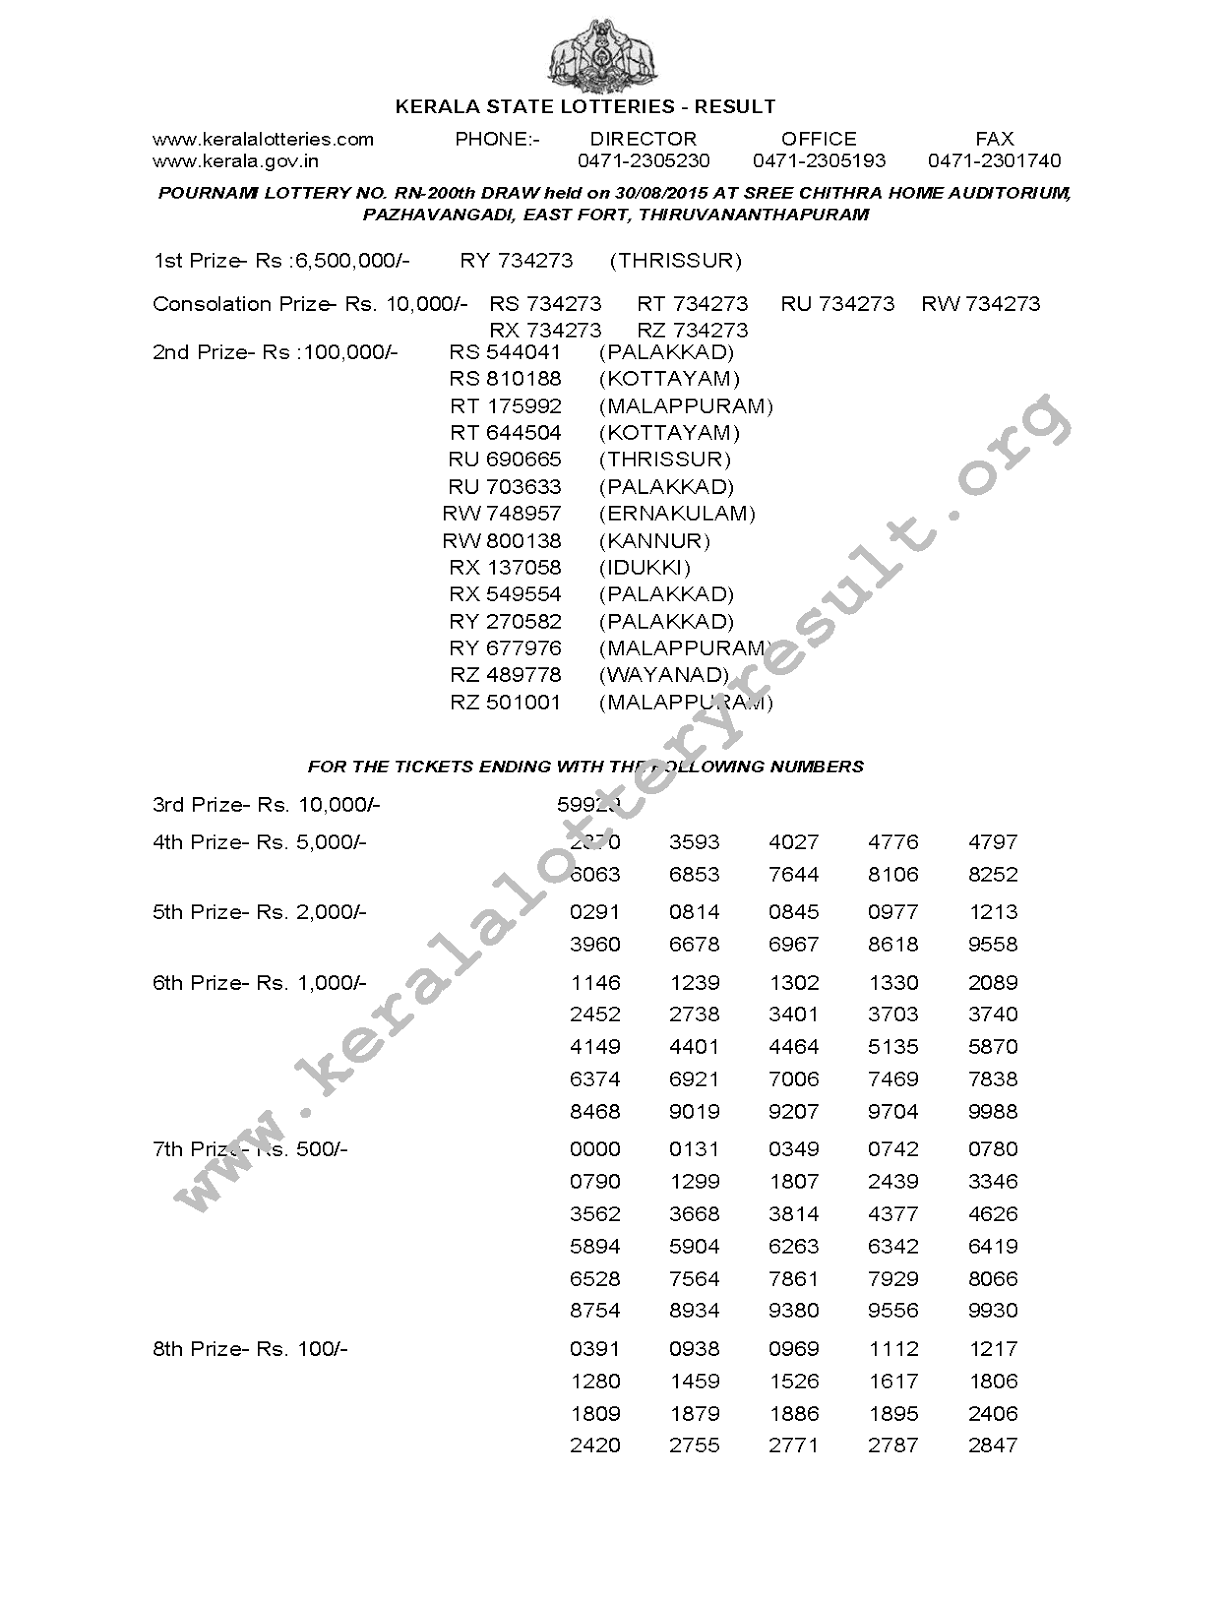 POURNAMI Lottery RN 200 Result 30-8-2015